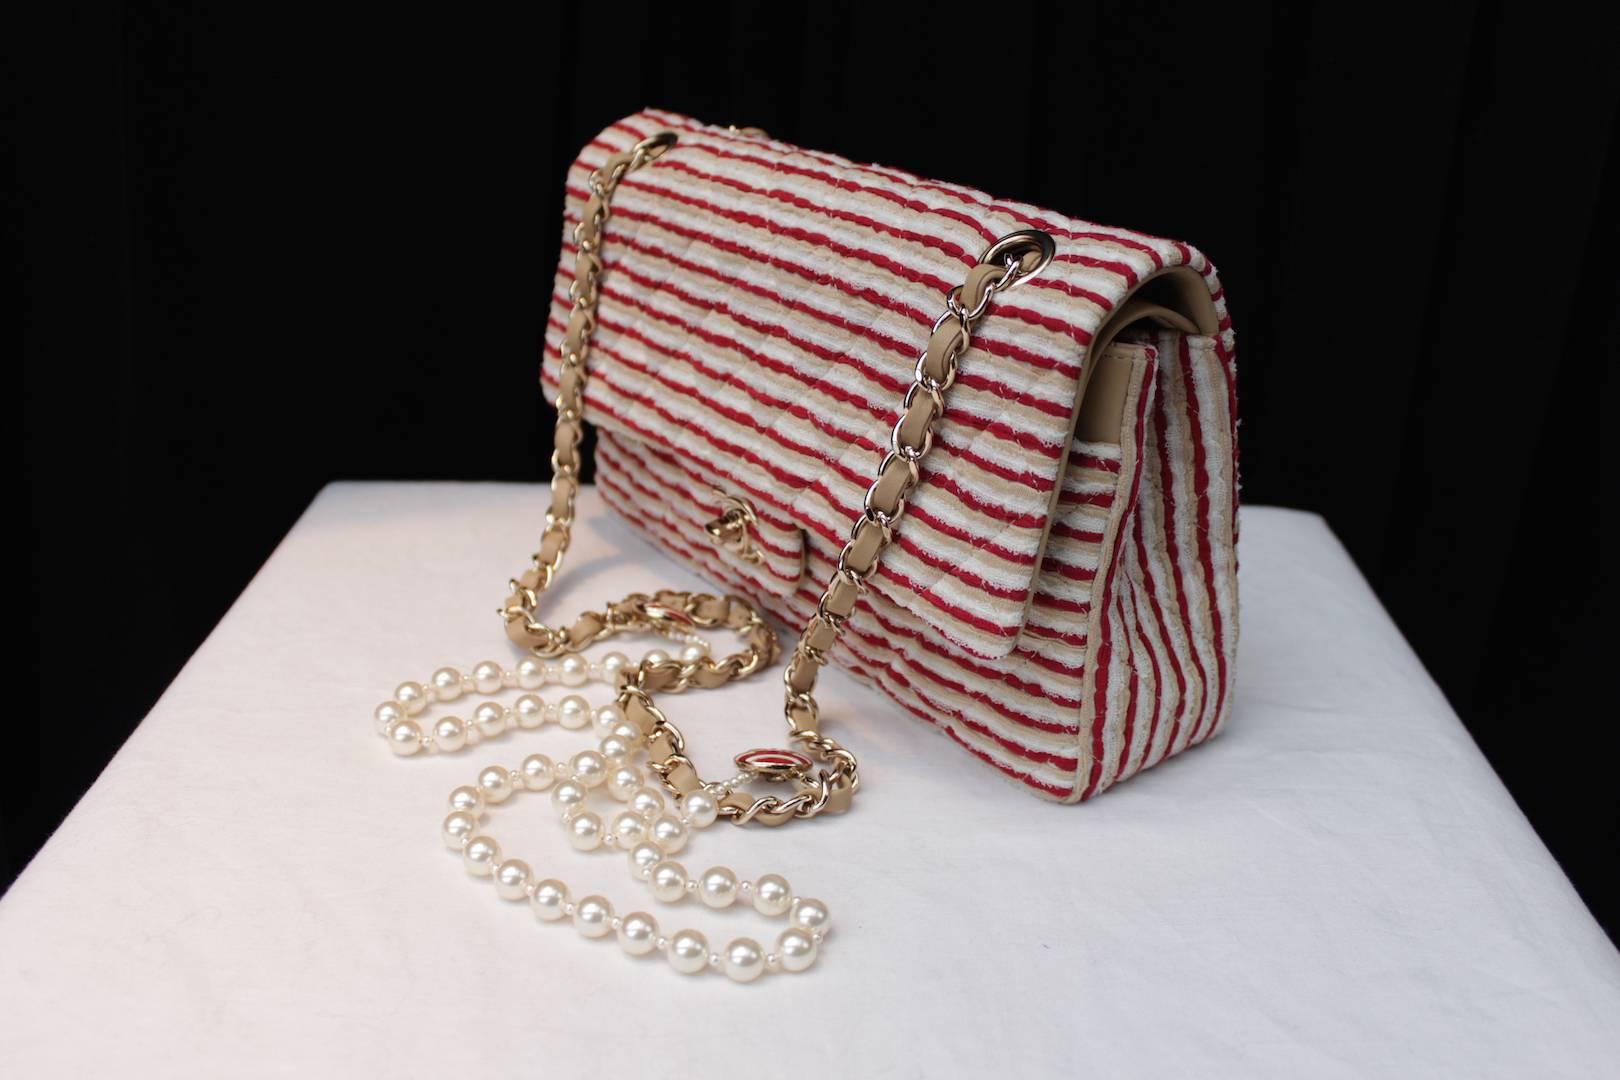 CHANEL (Made in Italy) Timeless model bag consisting of thin stripes of red and ecru cotton and white lace displayed in a pattern of horizontal stripes. 

Gilt metal hardaware including a CC turnlock clasp and a sliding chain handle interlaced